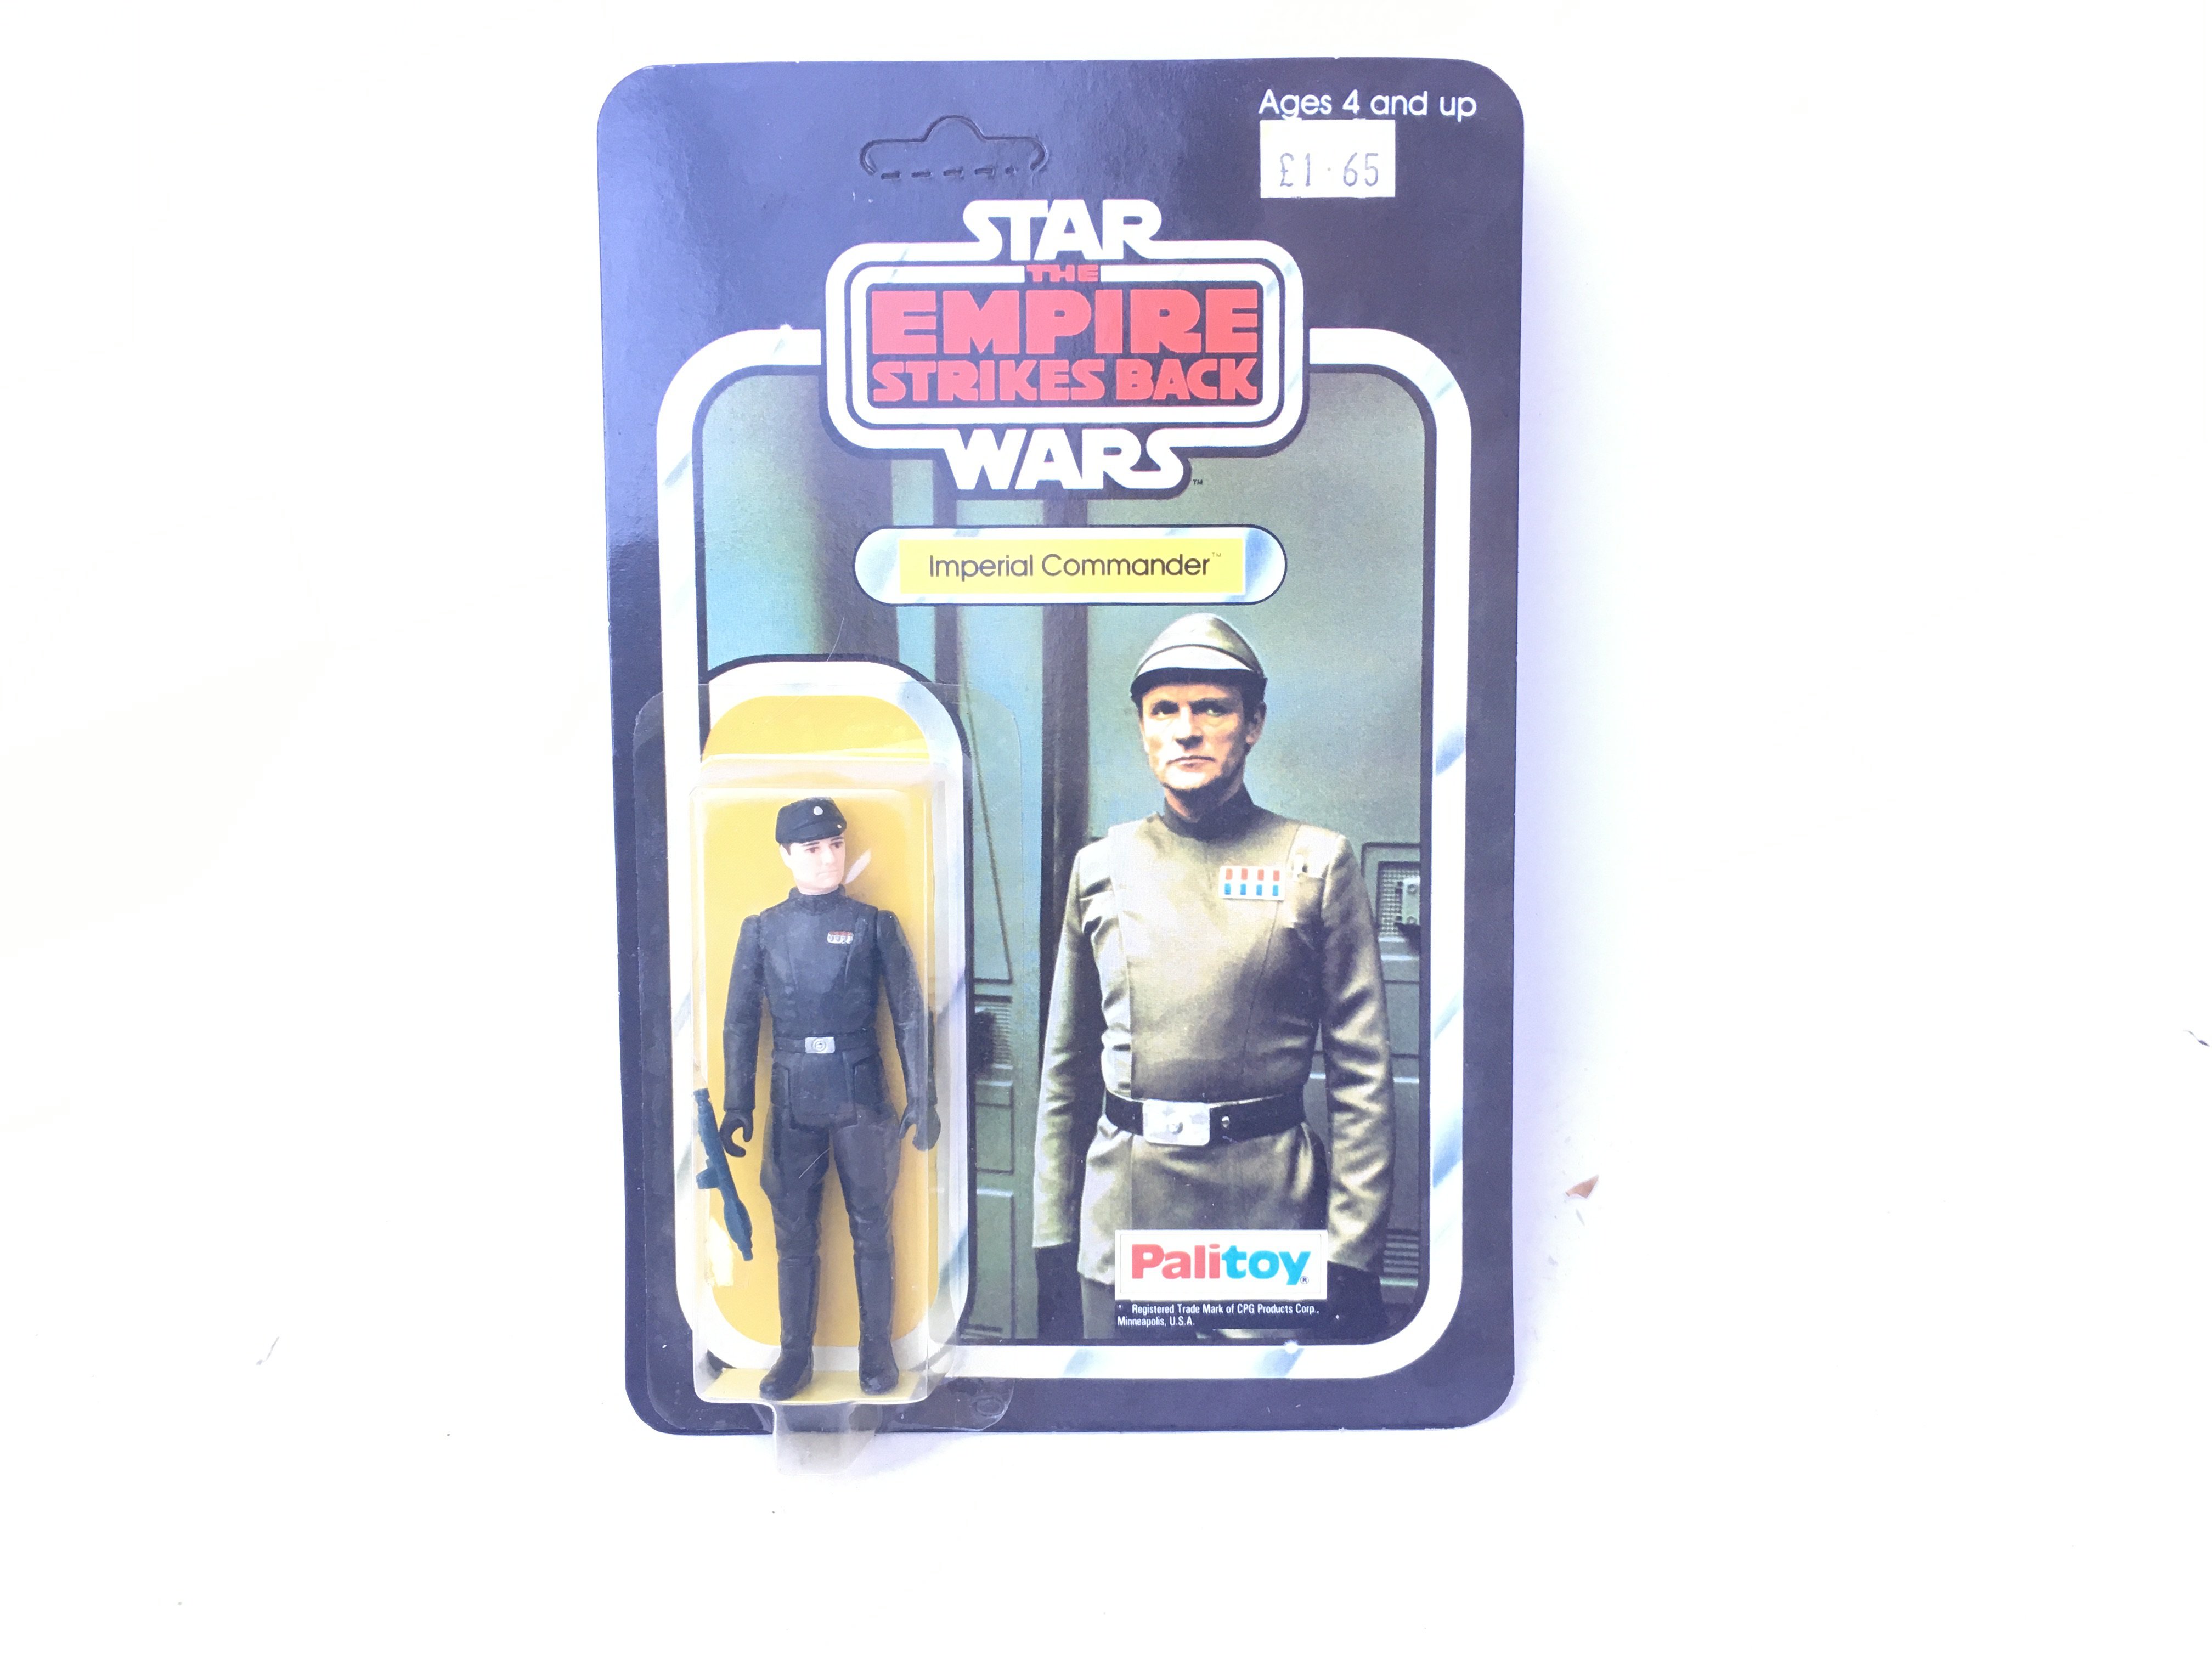 A Carded Star Wars Imperial Commander by Palitoy